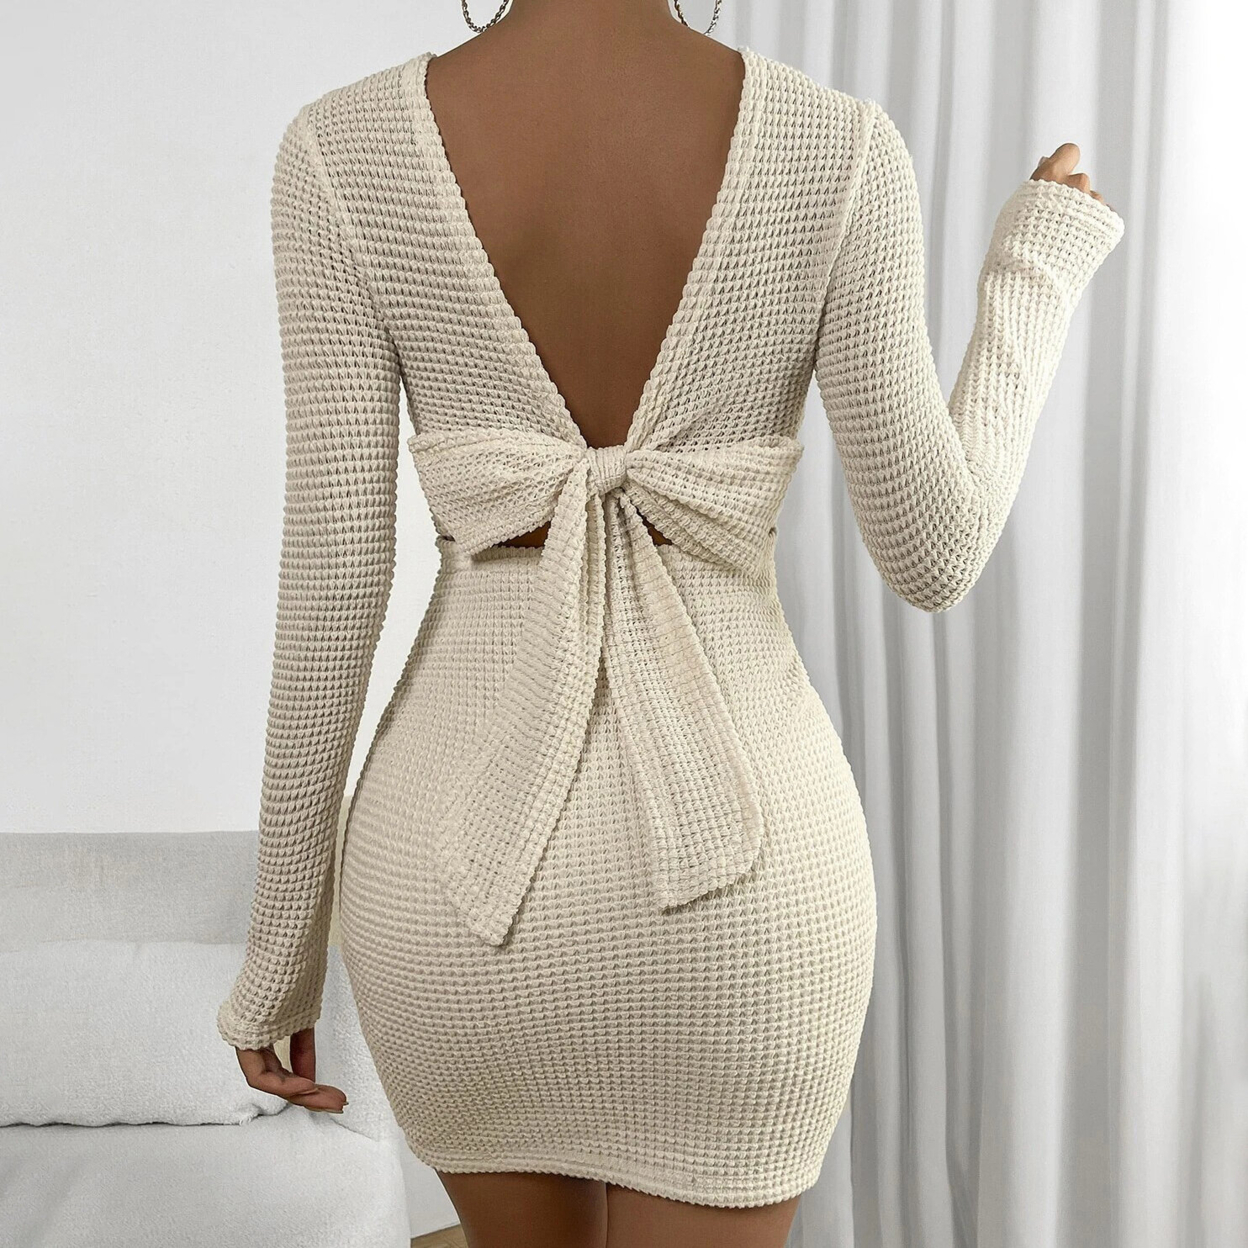 Tied Backless Bodycon Dress - Large(8/10)